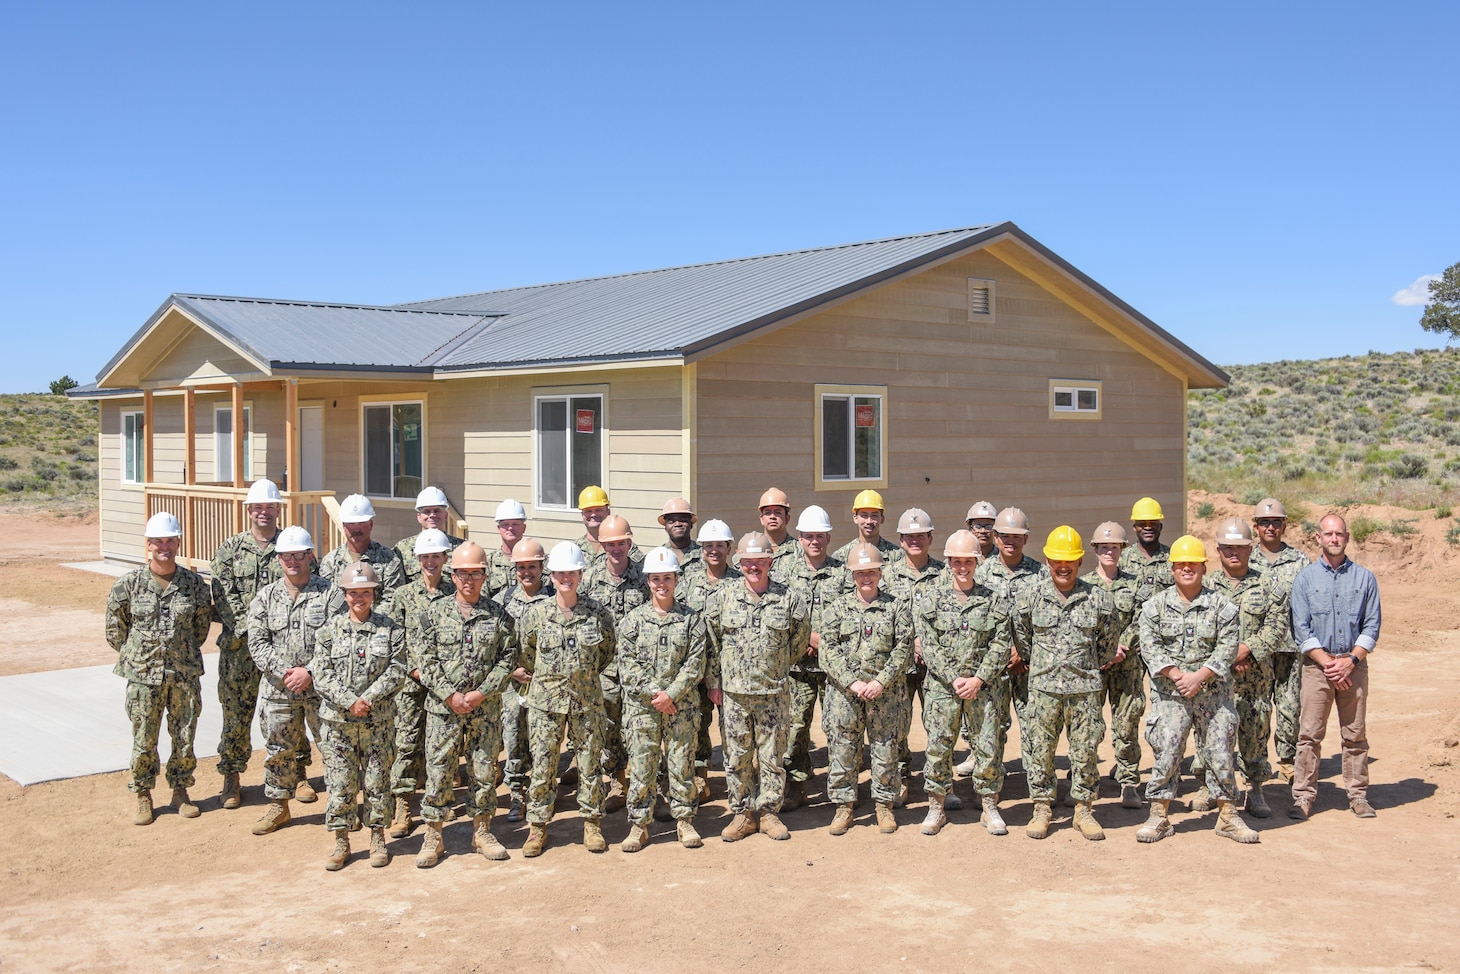 GALLUP, N.M. (June 15, 2023) Navy Reserve Sailors pose for a group photo in front of a newly constructed home they built as a charitable contribution and training opportunity in partnership with the Southwest Indian Foundation. The home's construction served to educate Seabees in various practical construction techniques needed for mission readiness while fulfilling the needs of a community partner as part of the Department of Defense's Innovative Readiness Training (IRT) program. Representatives from Naval Mobile Construction Battalion (NMCB) 18, FIRST Naval Construction Regiment (FIRST NCR) and Southwest Indian Foundation are depicted.